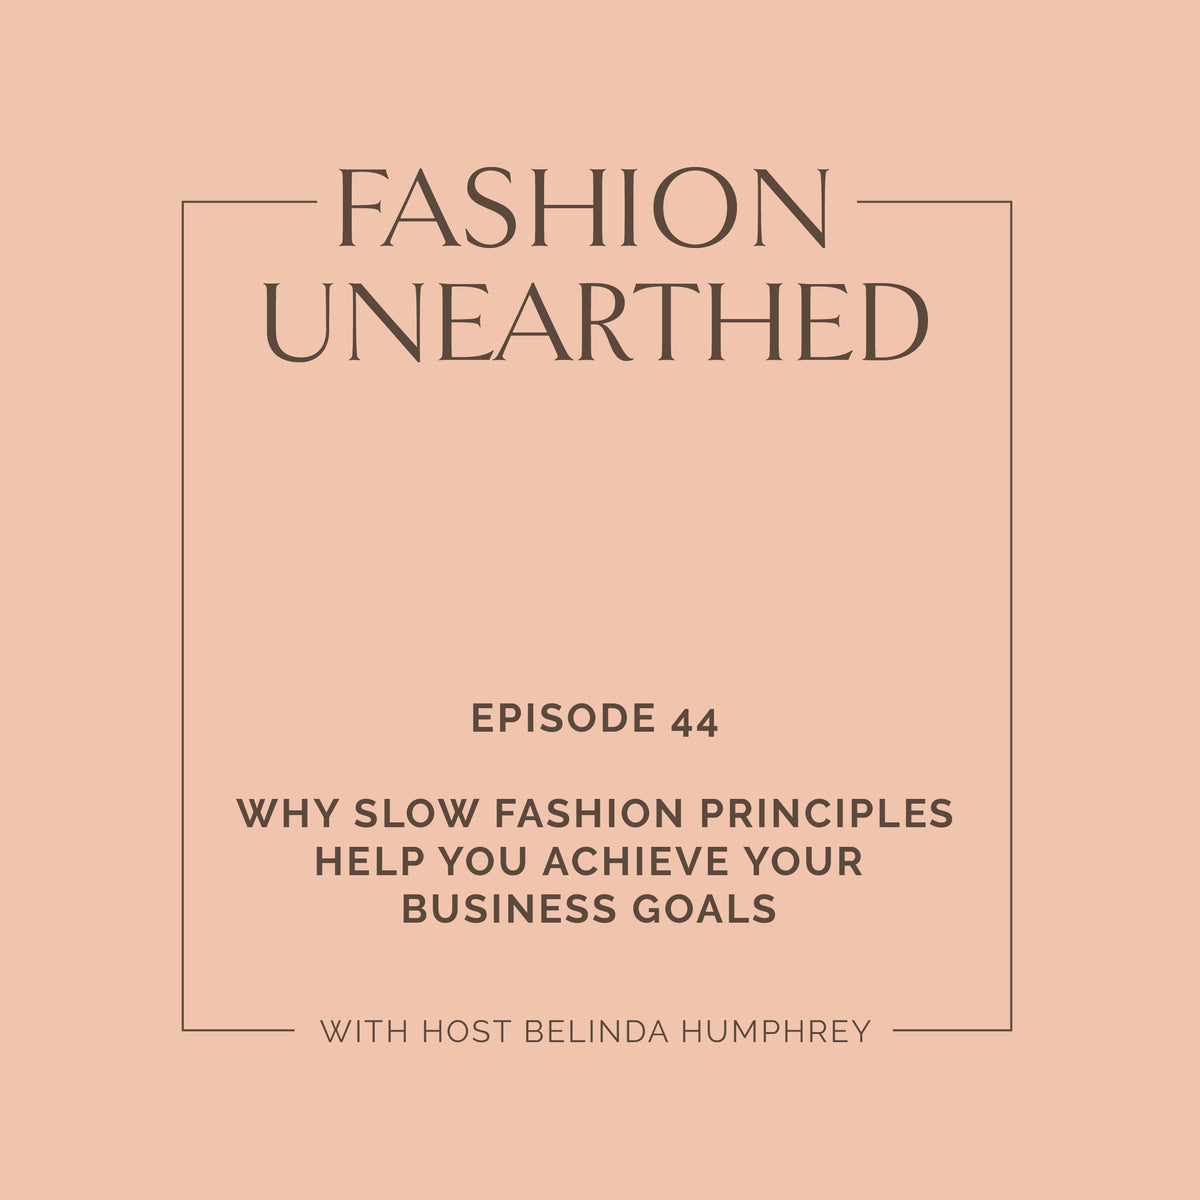 Episode 44: Why slow fashion principles help you achieve your business goals